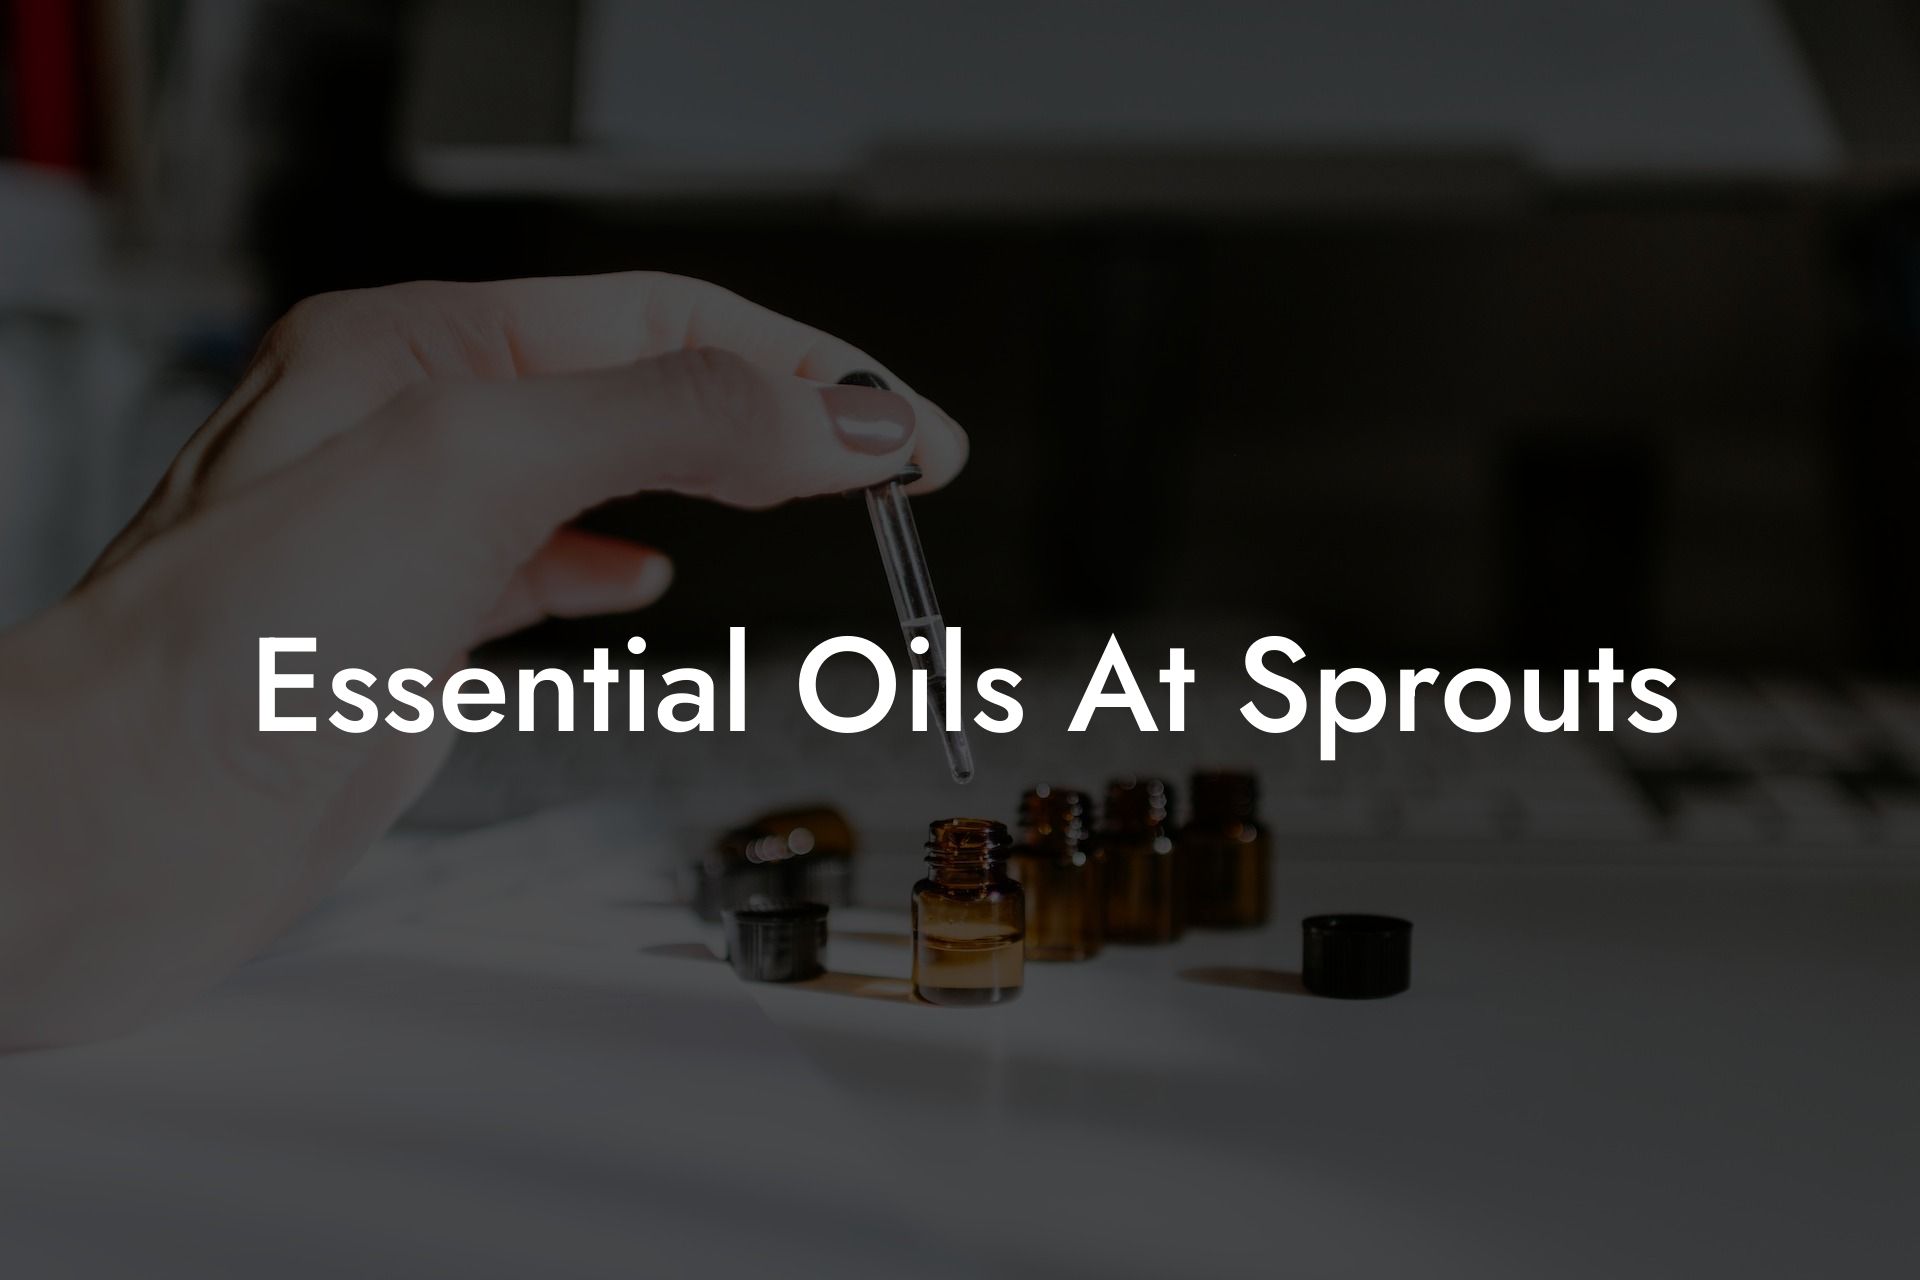 Essential Oils At Sprouts